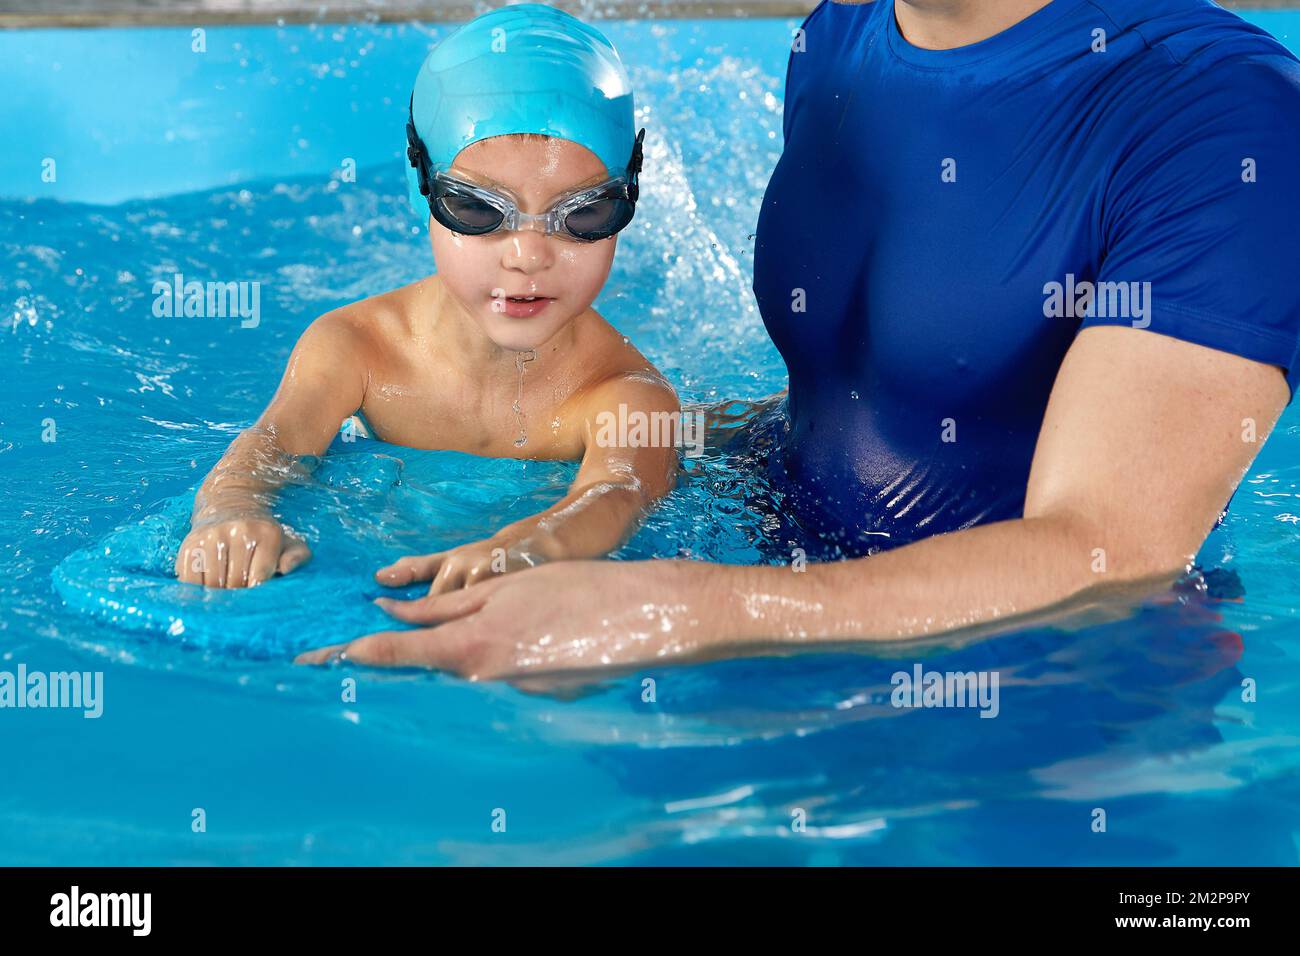 Little boy learning to swim in indoor pool with pool board and trainer Stock Photo